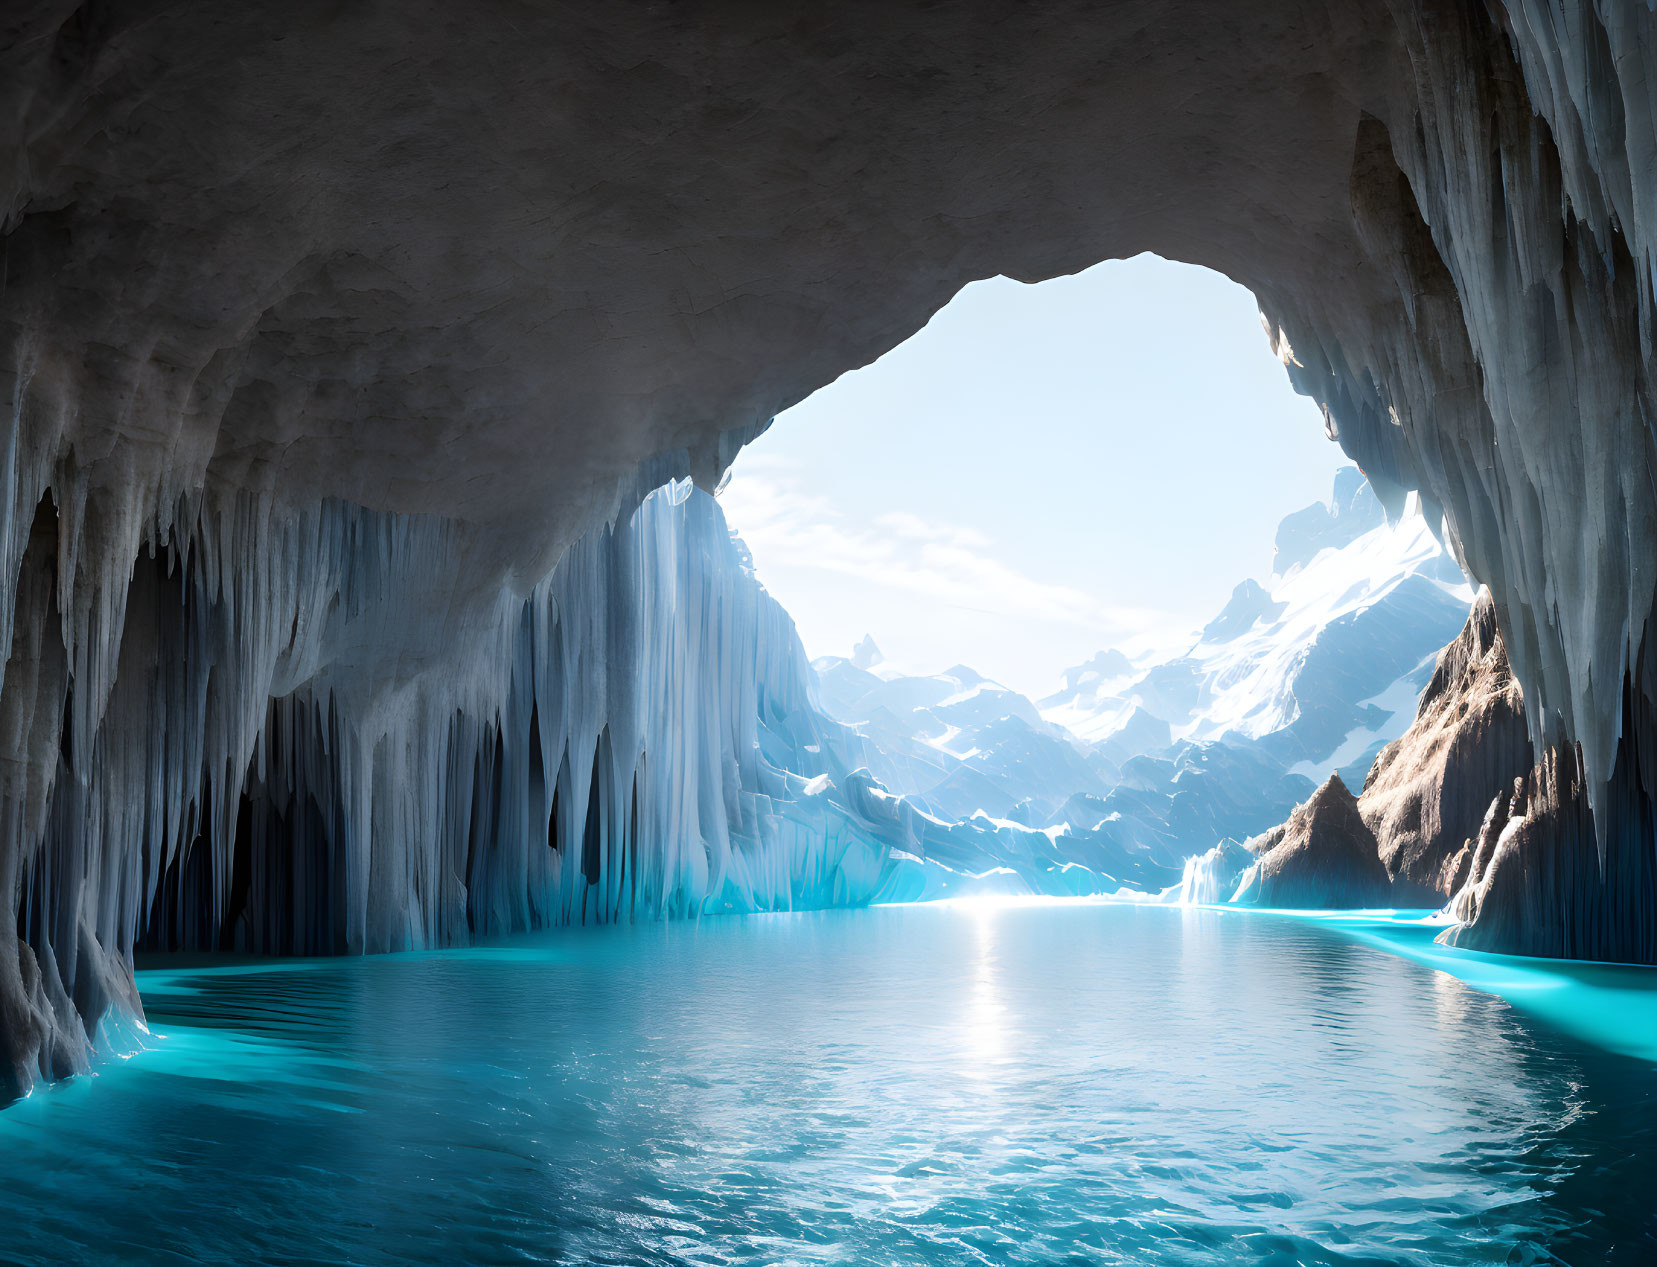 Glacier Cave with Turquoise Lake and Snow-Capped Mountains